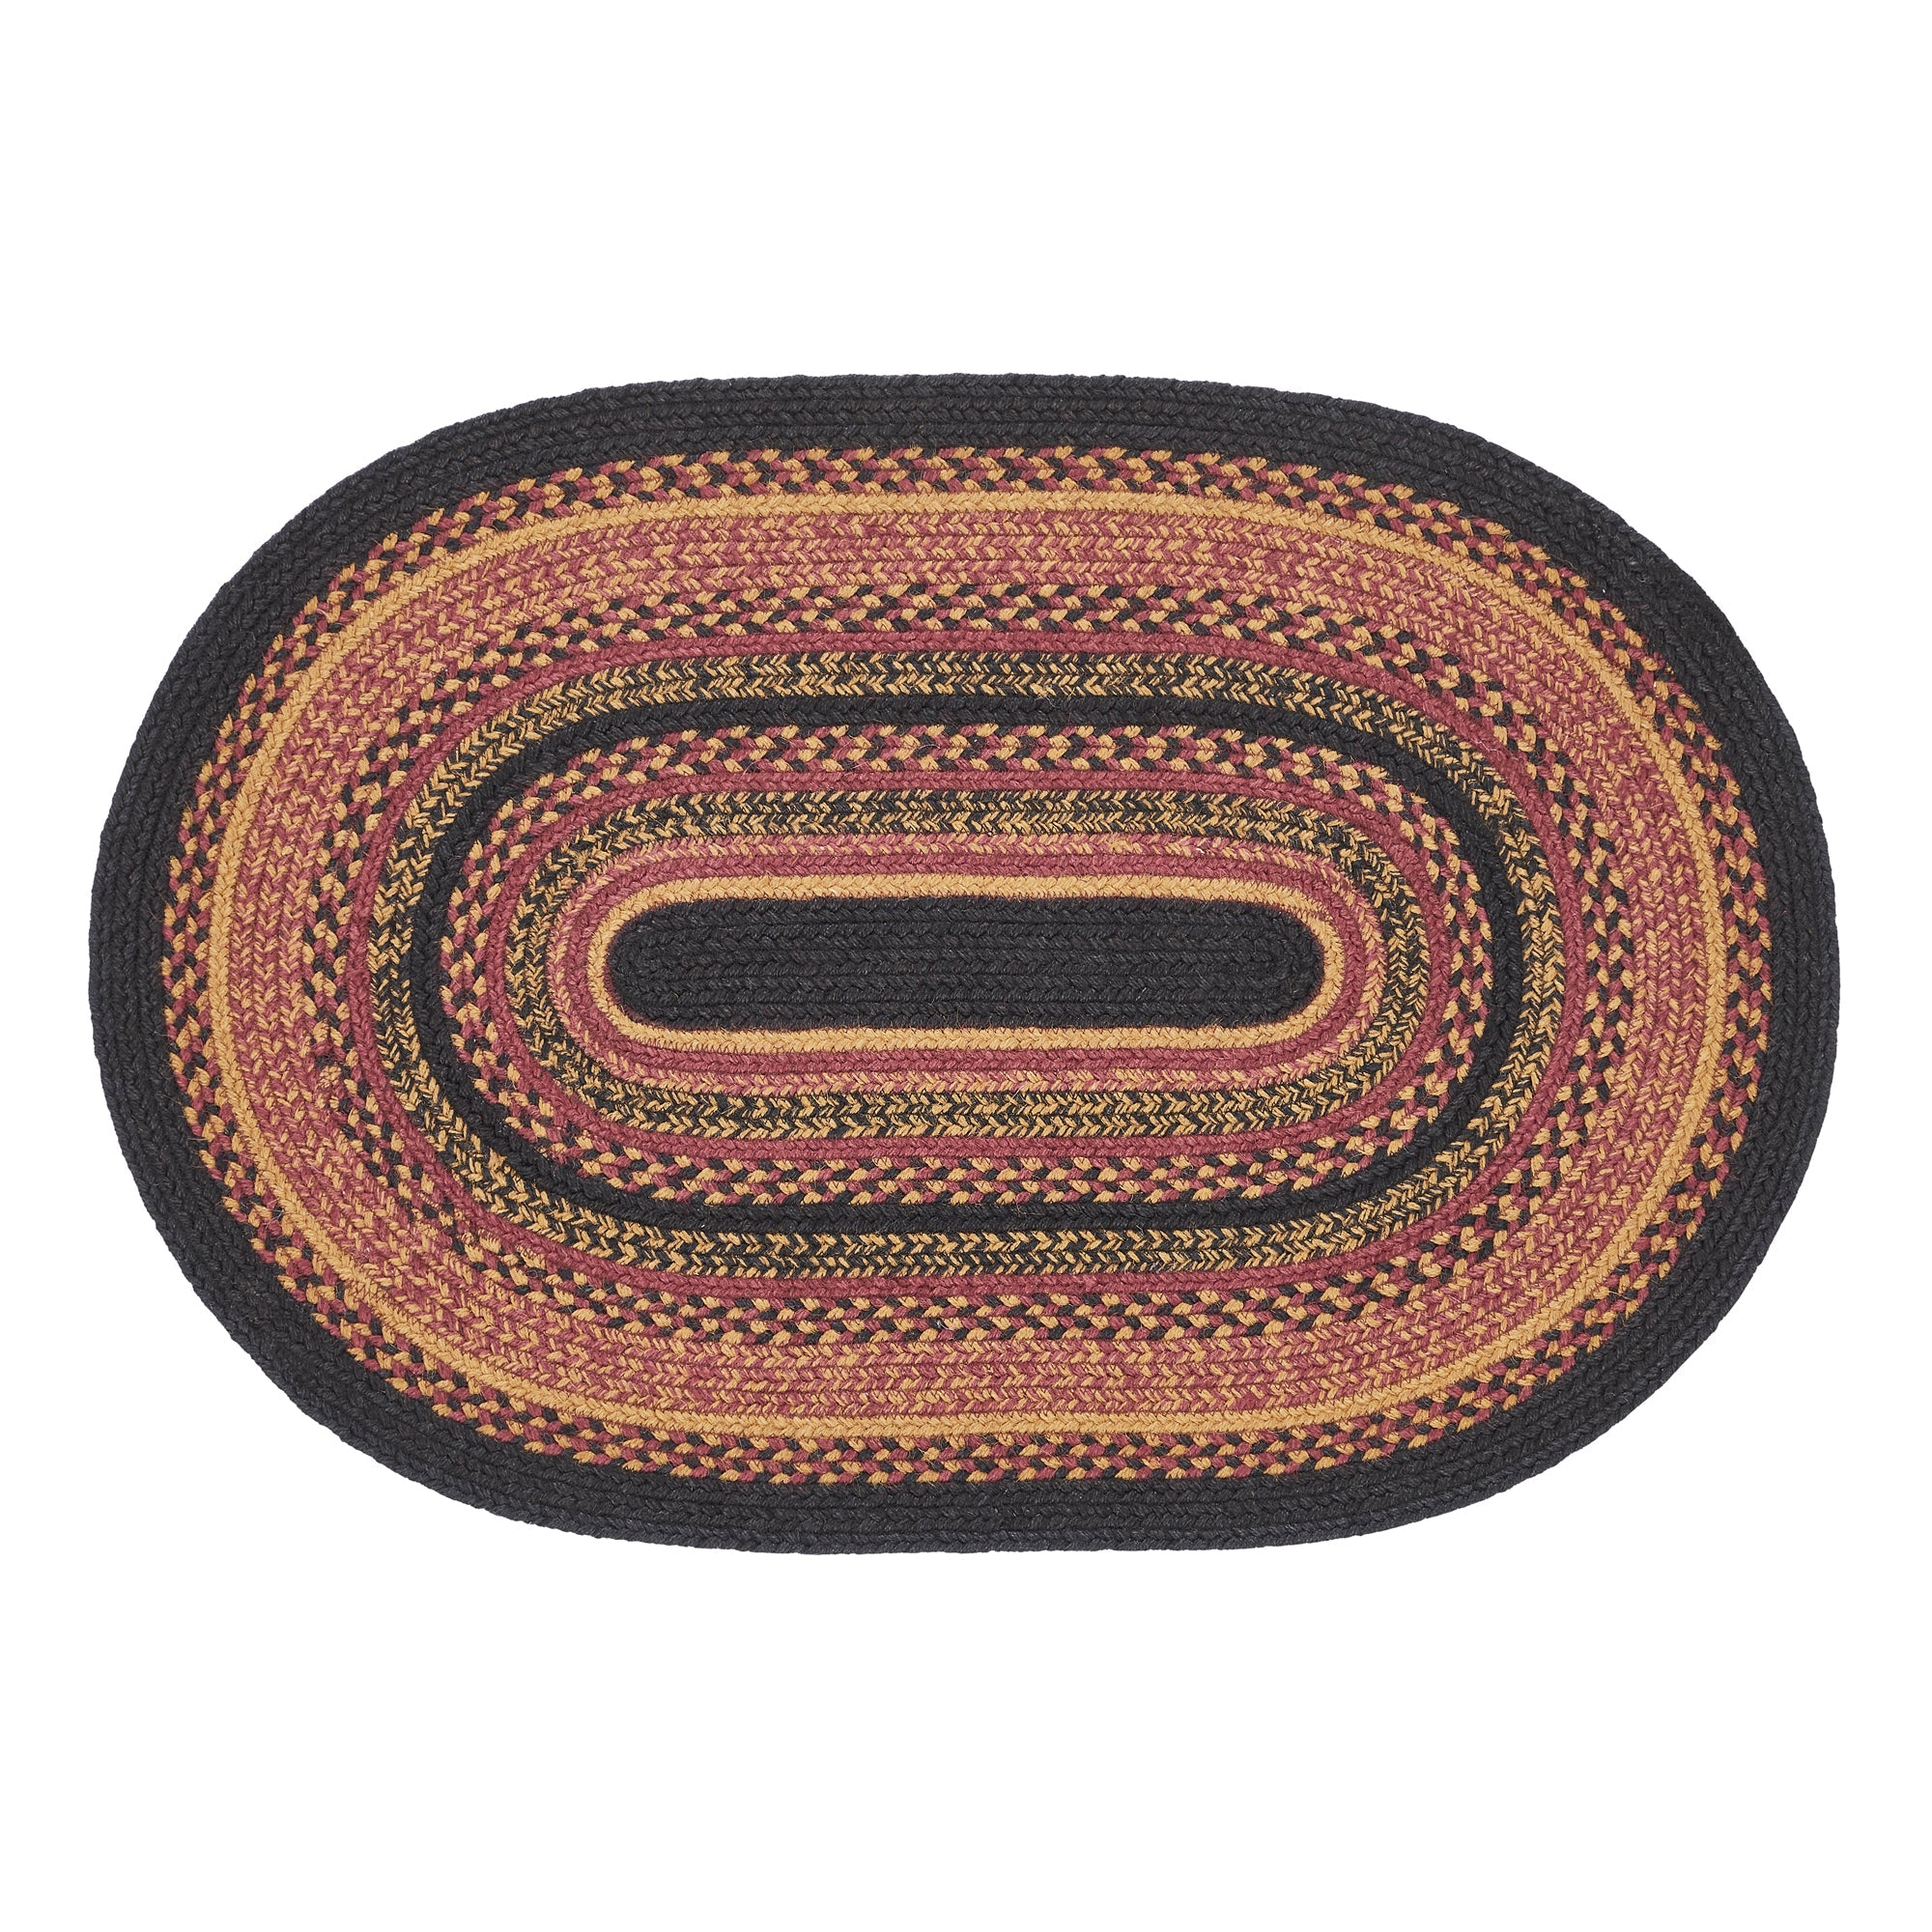 Heritage Farms Jute Braided Rug Oval with Rug Pad 24"x36" VHC Brands